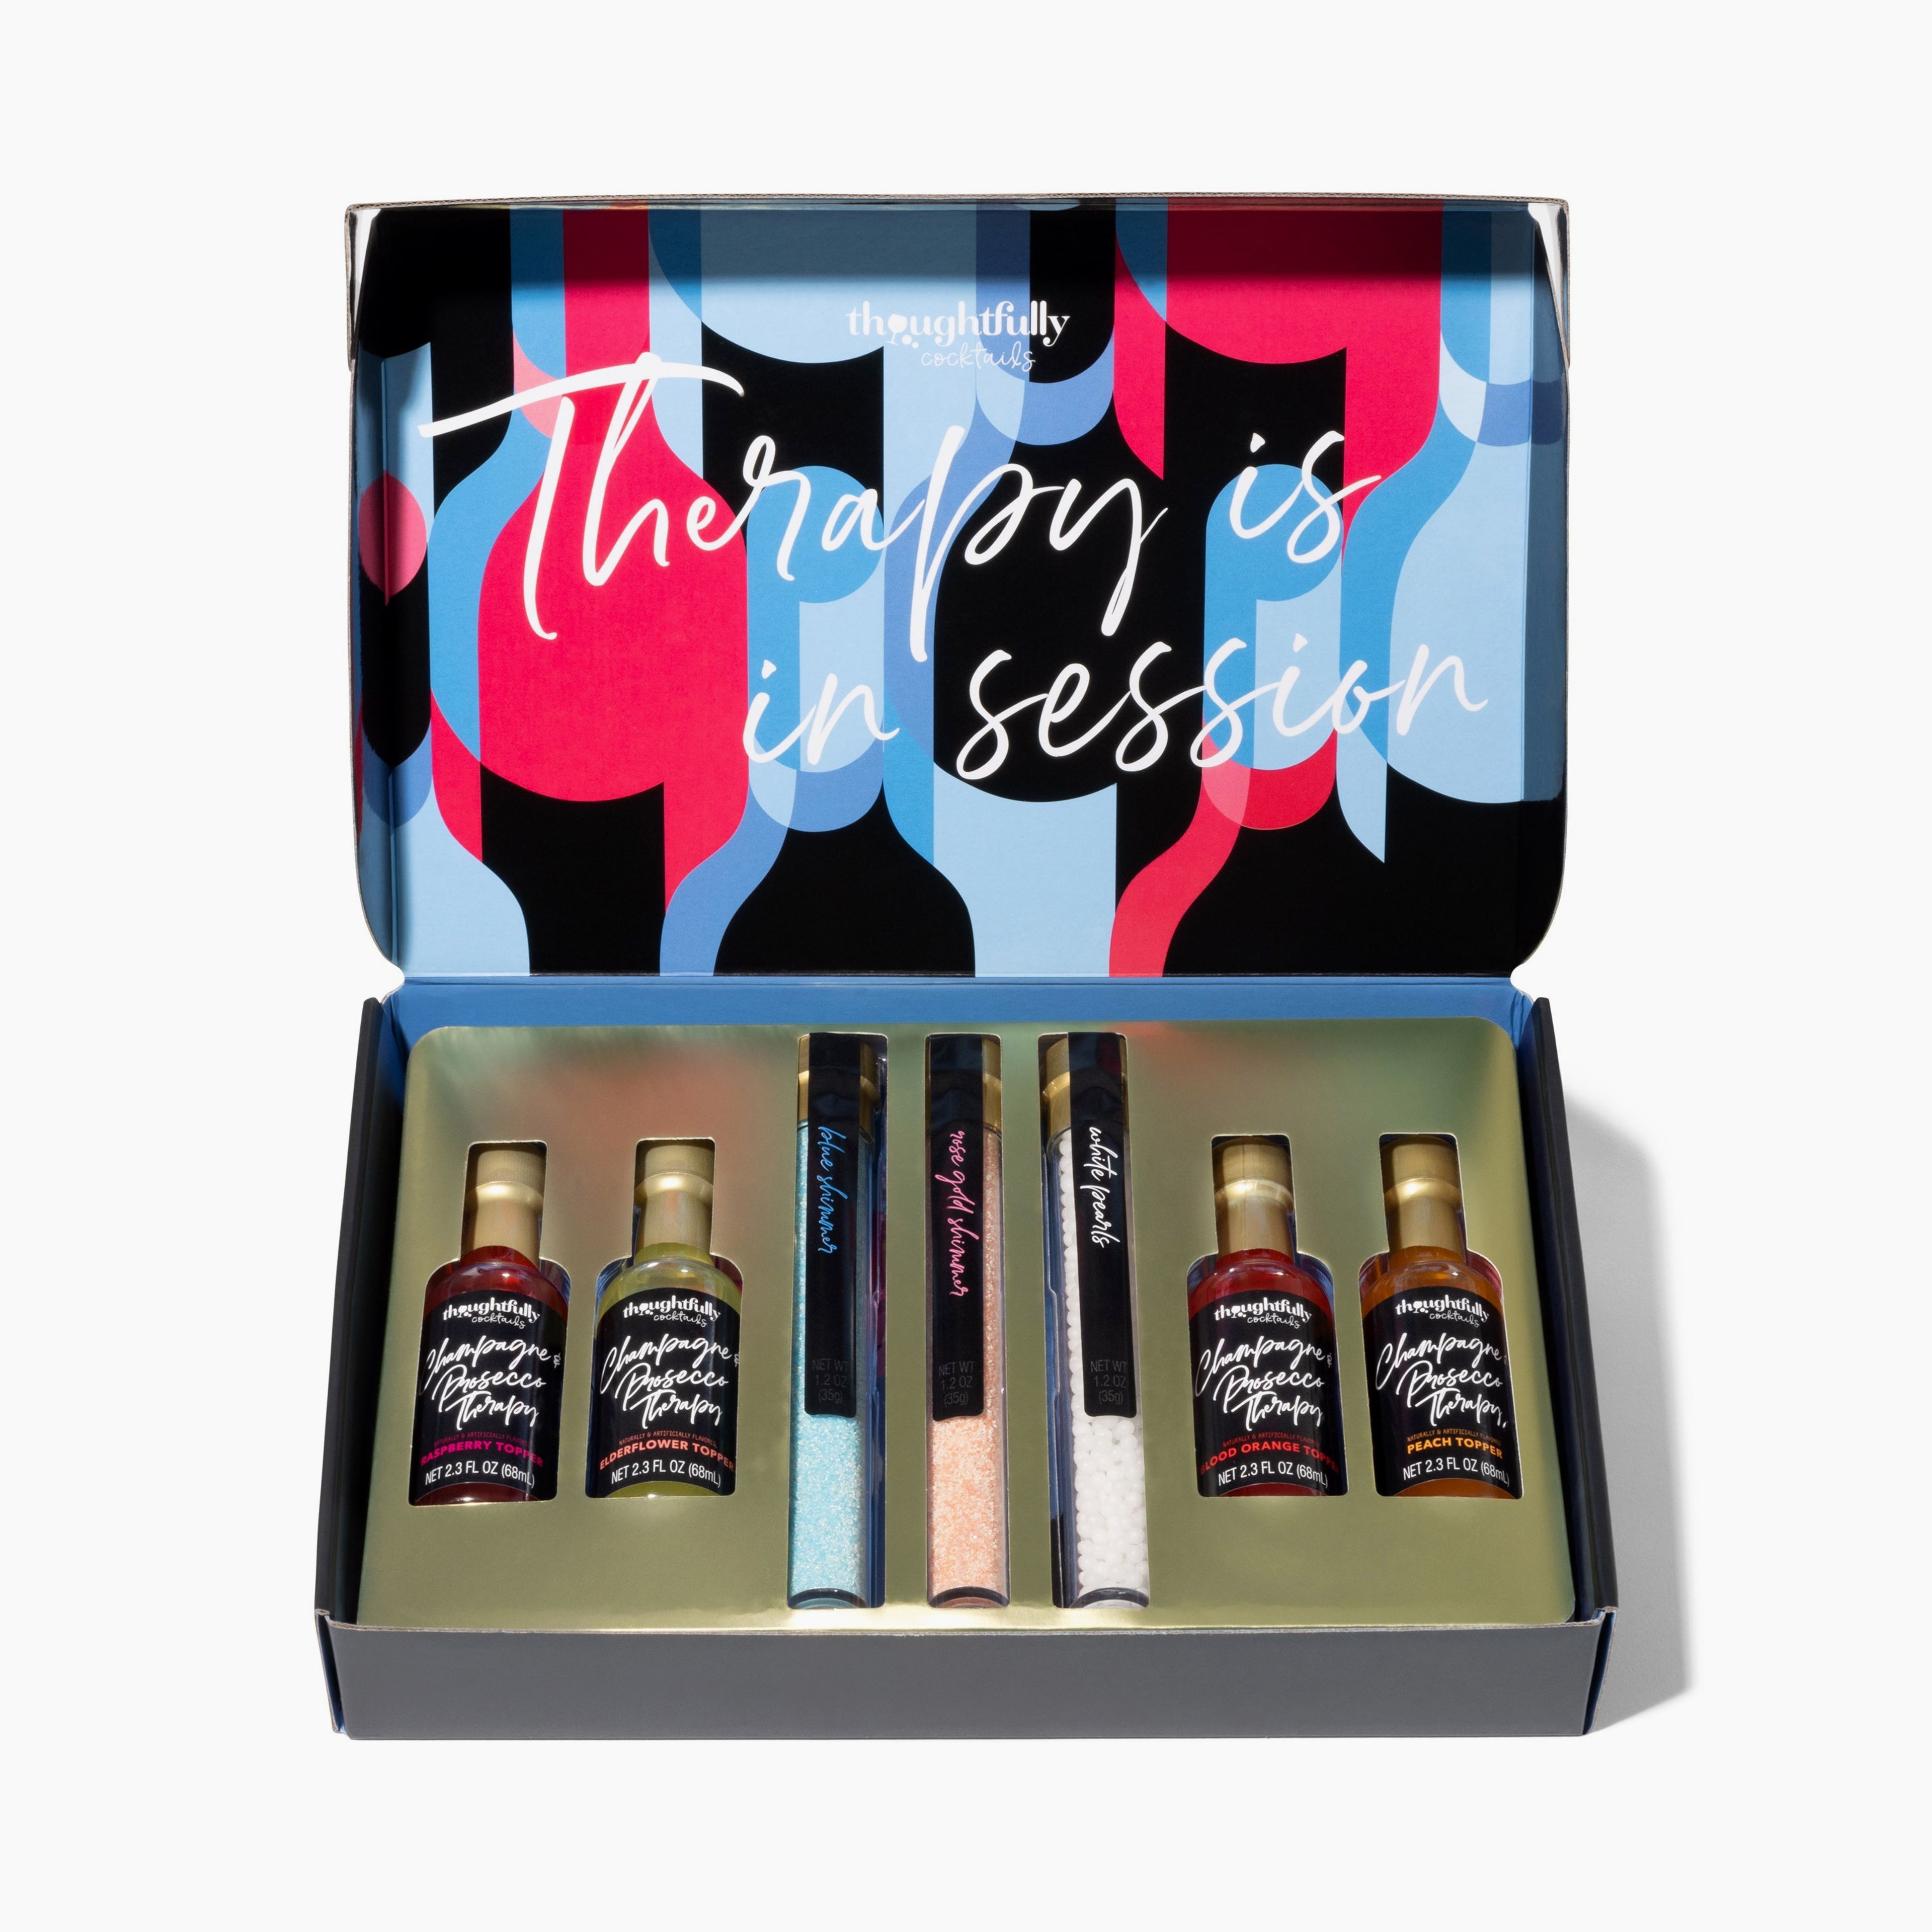 Champagne and Prosecco Therapy Cocktail Gift Set